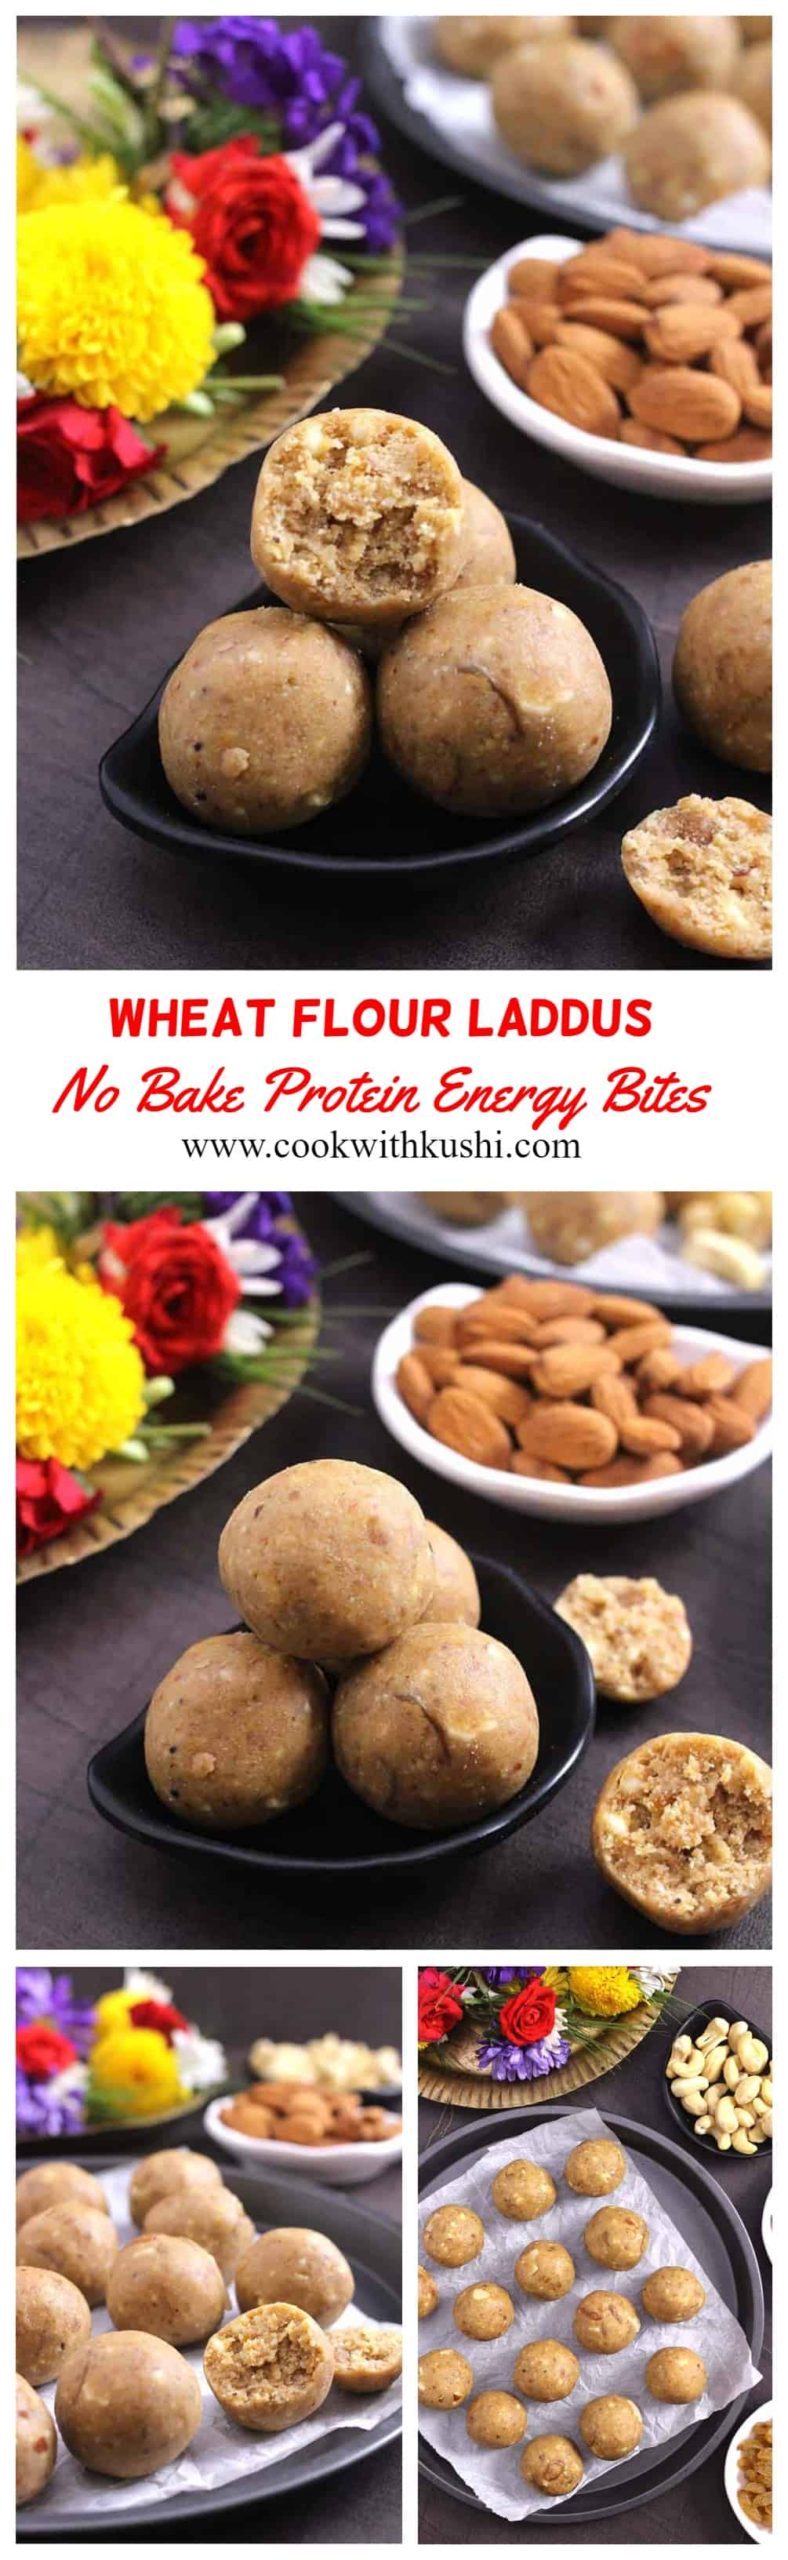 Atta Ladoo or Wheat Flour Laddu with Jaggery is a classic and rich, melt-in-mouth, and irresistibly delicious Indian sweet recipe that you should prepare during any festival or special occasion. #energybites #proteinbites #laddu #ladoo #mithai #indiansweets